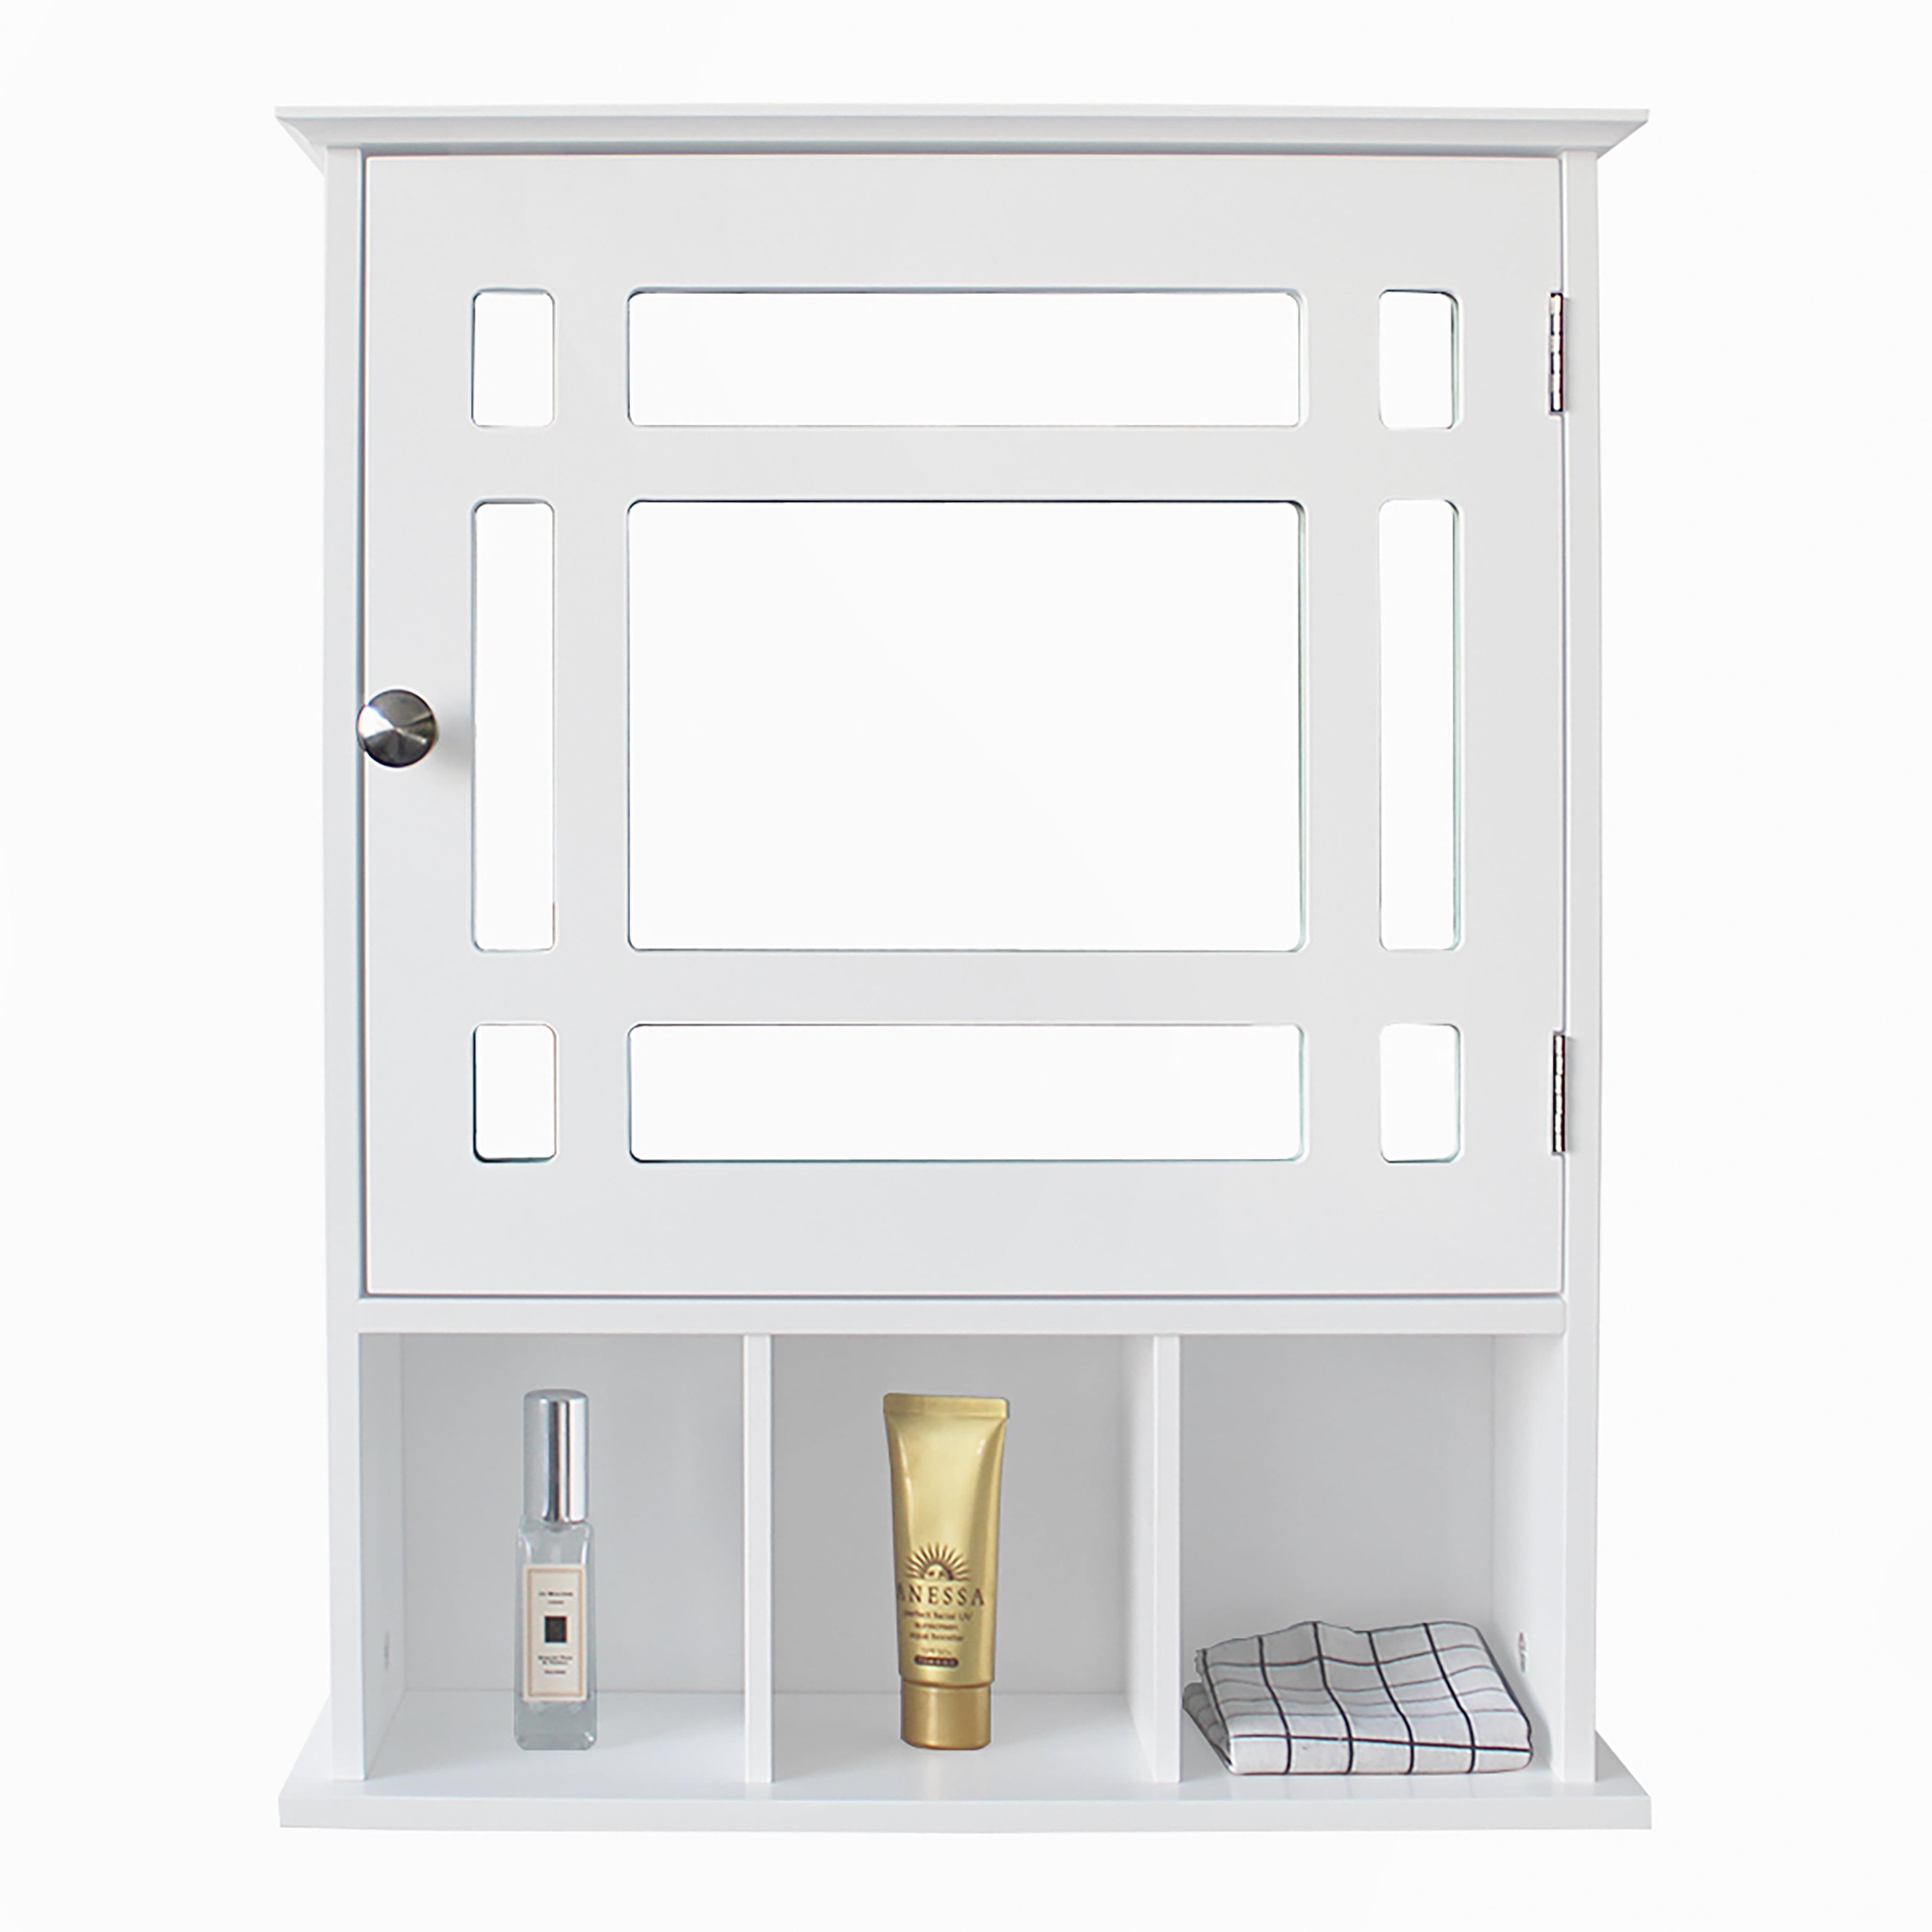 Ktaxon Bathroom Cabinet Wall Mount Mirrored Medicine Cabinet Storage Organizer with Single Door and Adjustable Shelves White, Size: 13.4 x 5.9 x 20.9